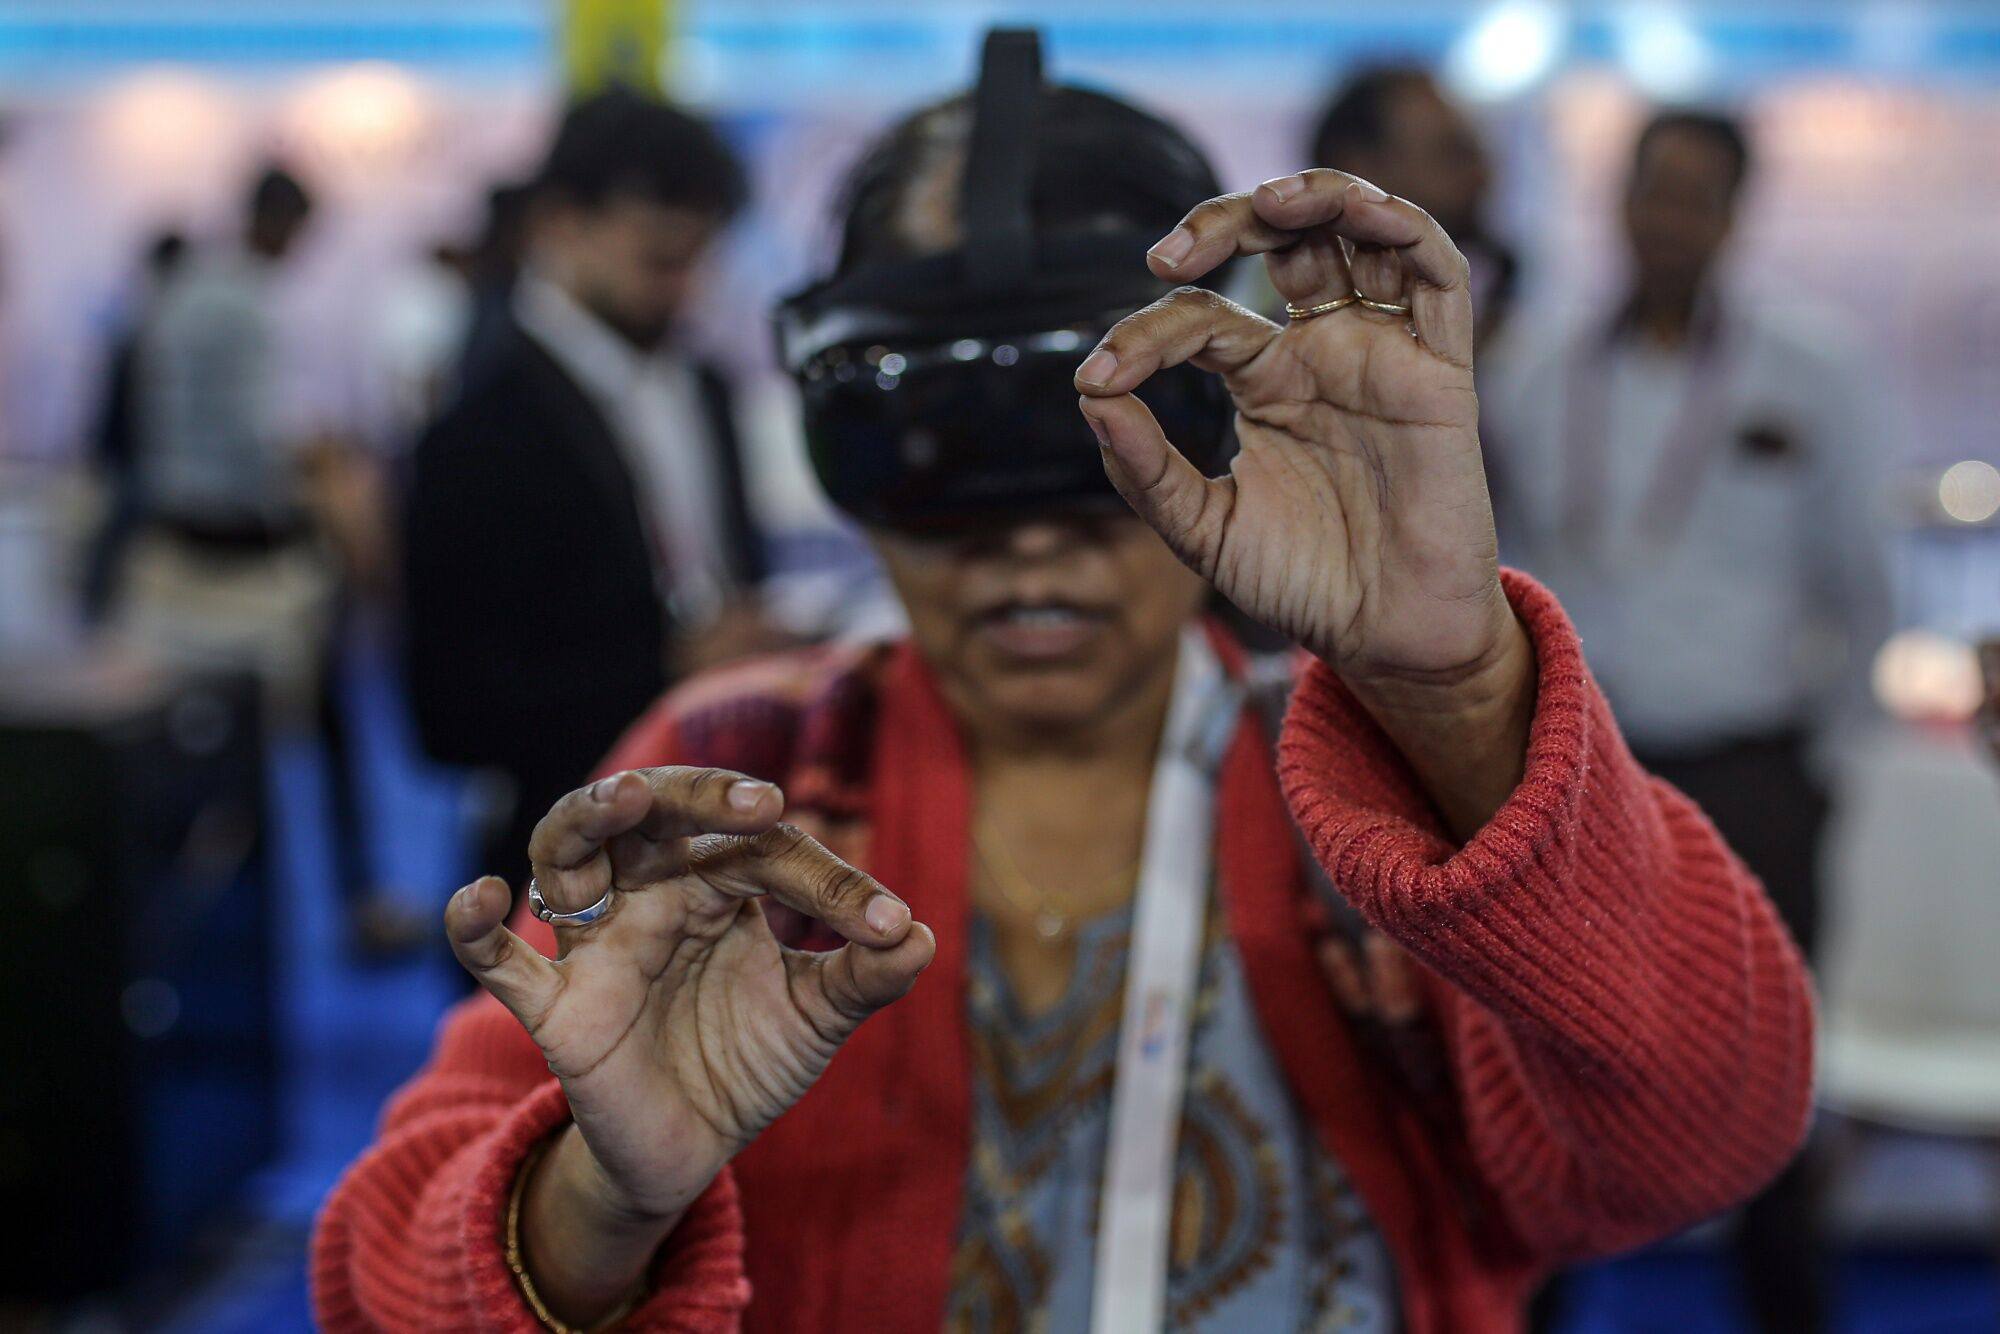 An attendee tries a virtual reality headset during the Vibrant Gujarat Global Summit in Gandhinagar, Gujarat, India. Photo: Bloomberg